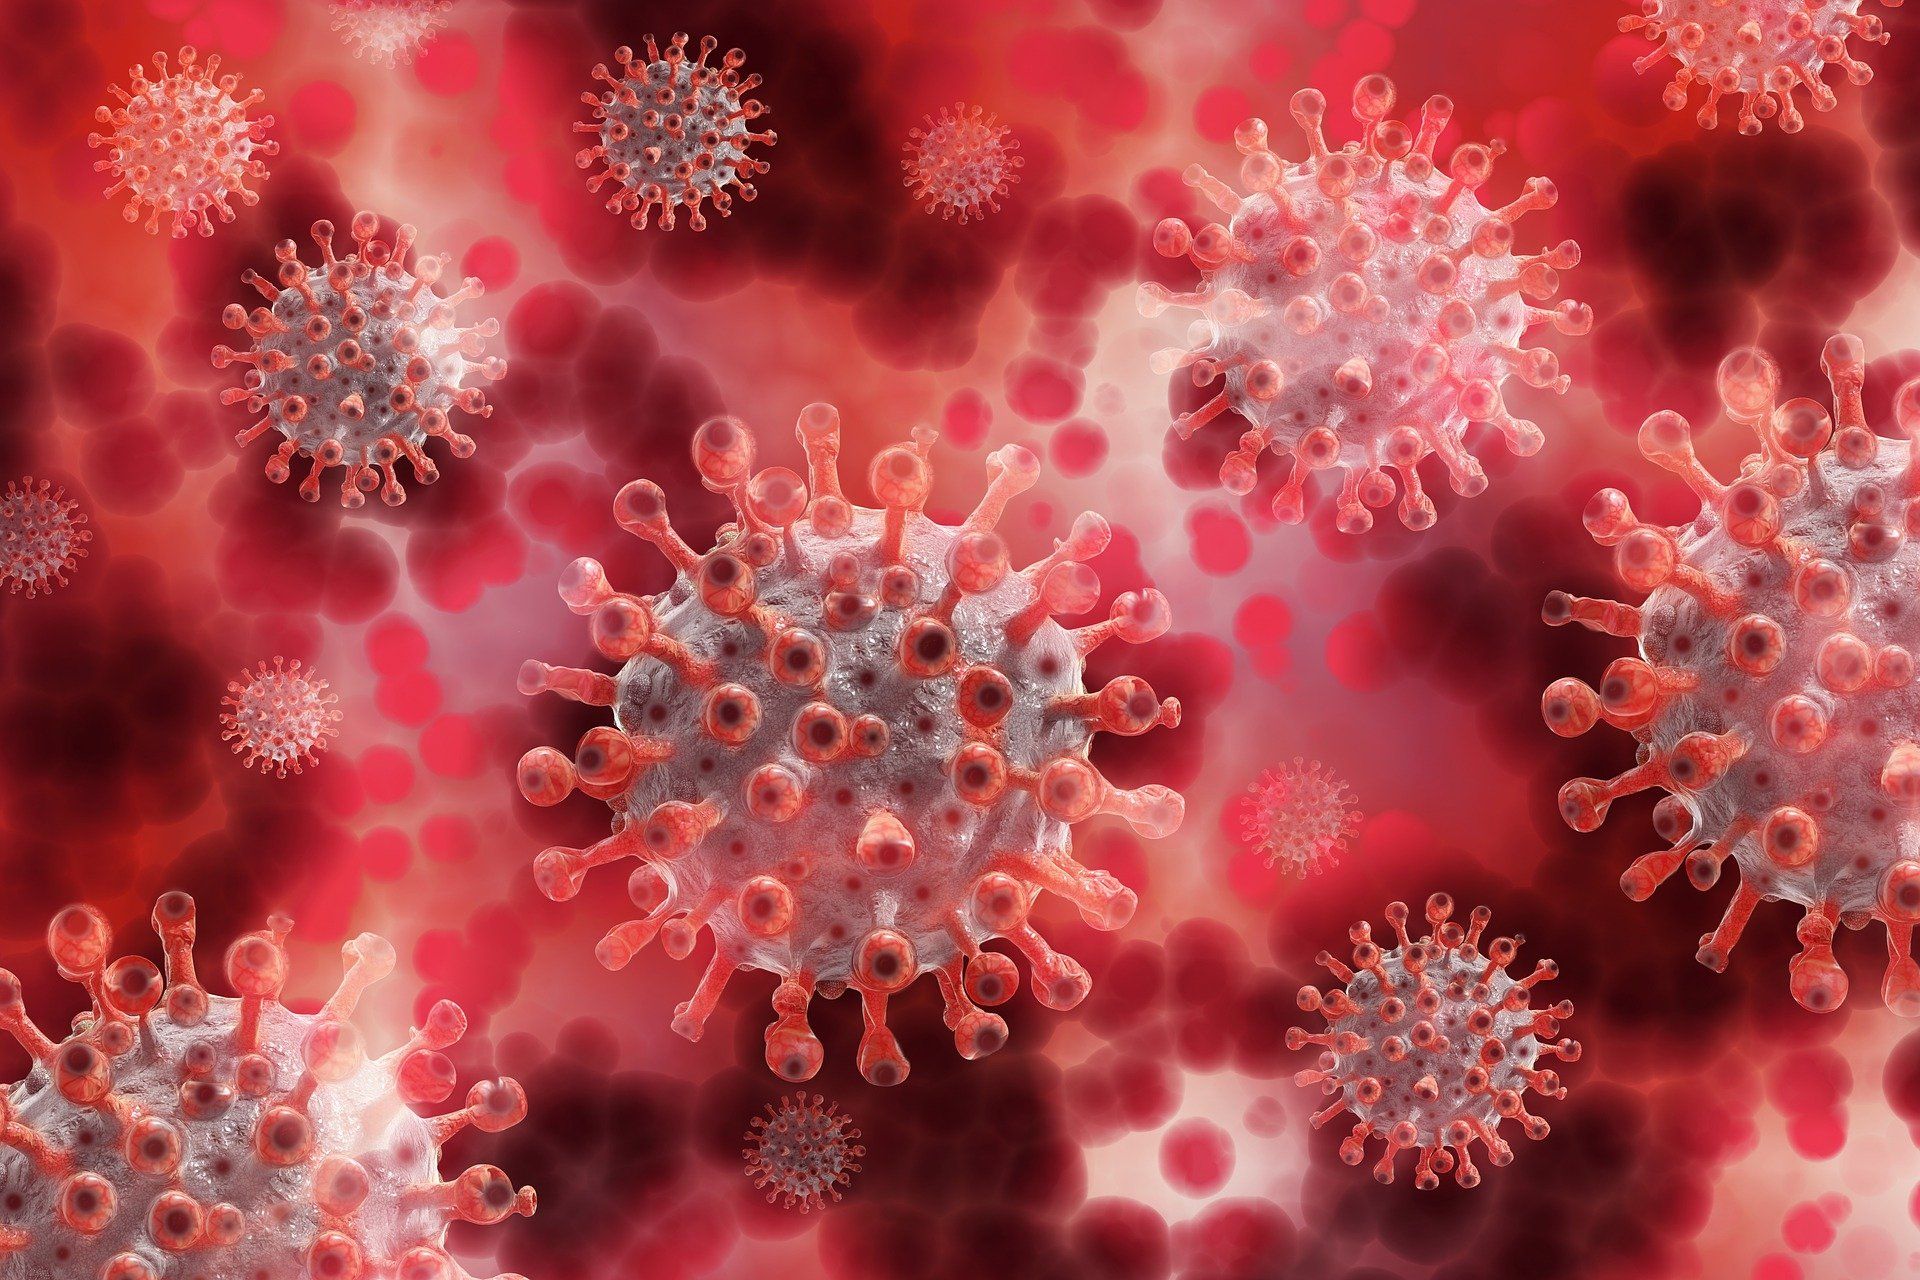 UK records 1,564 daily coronavirus deaths, worst figure since the disease appeared in country